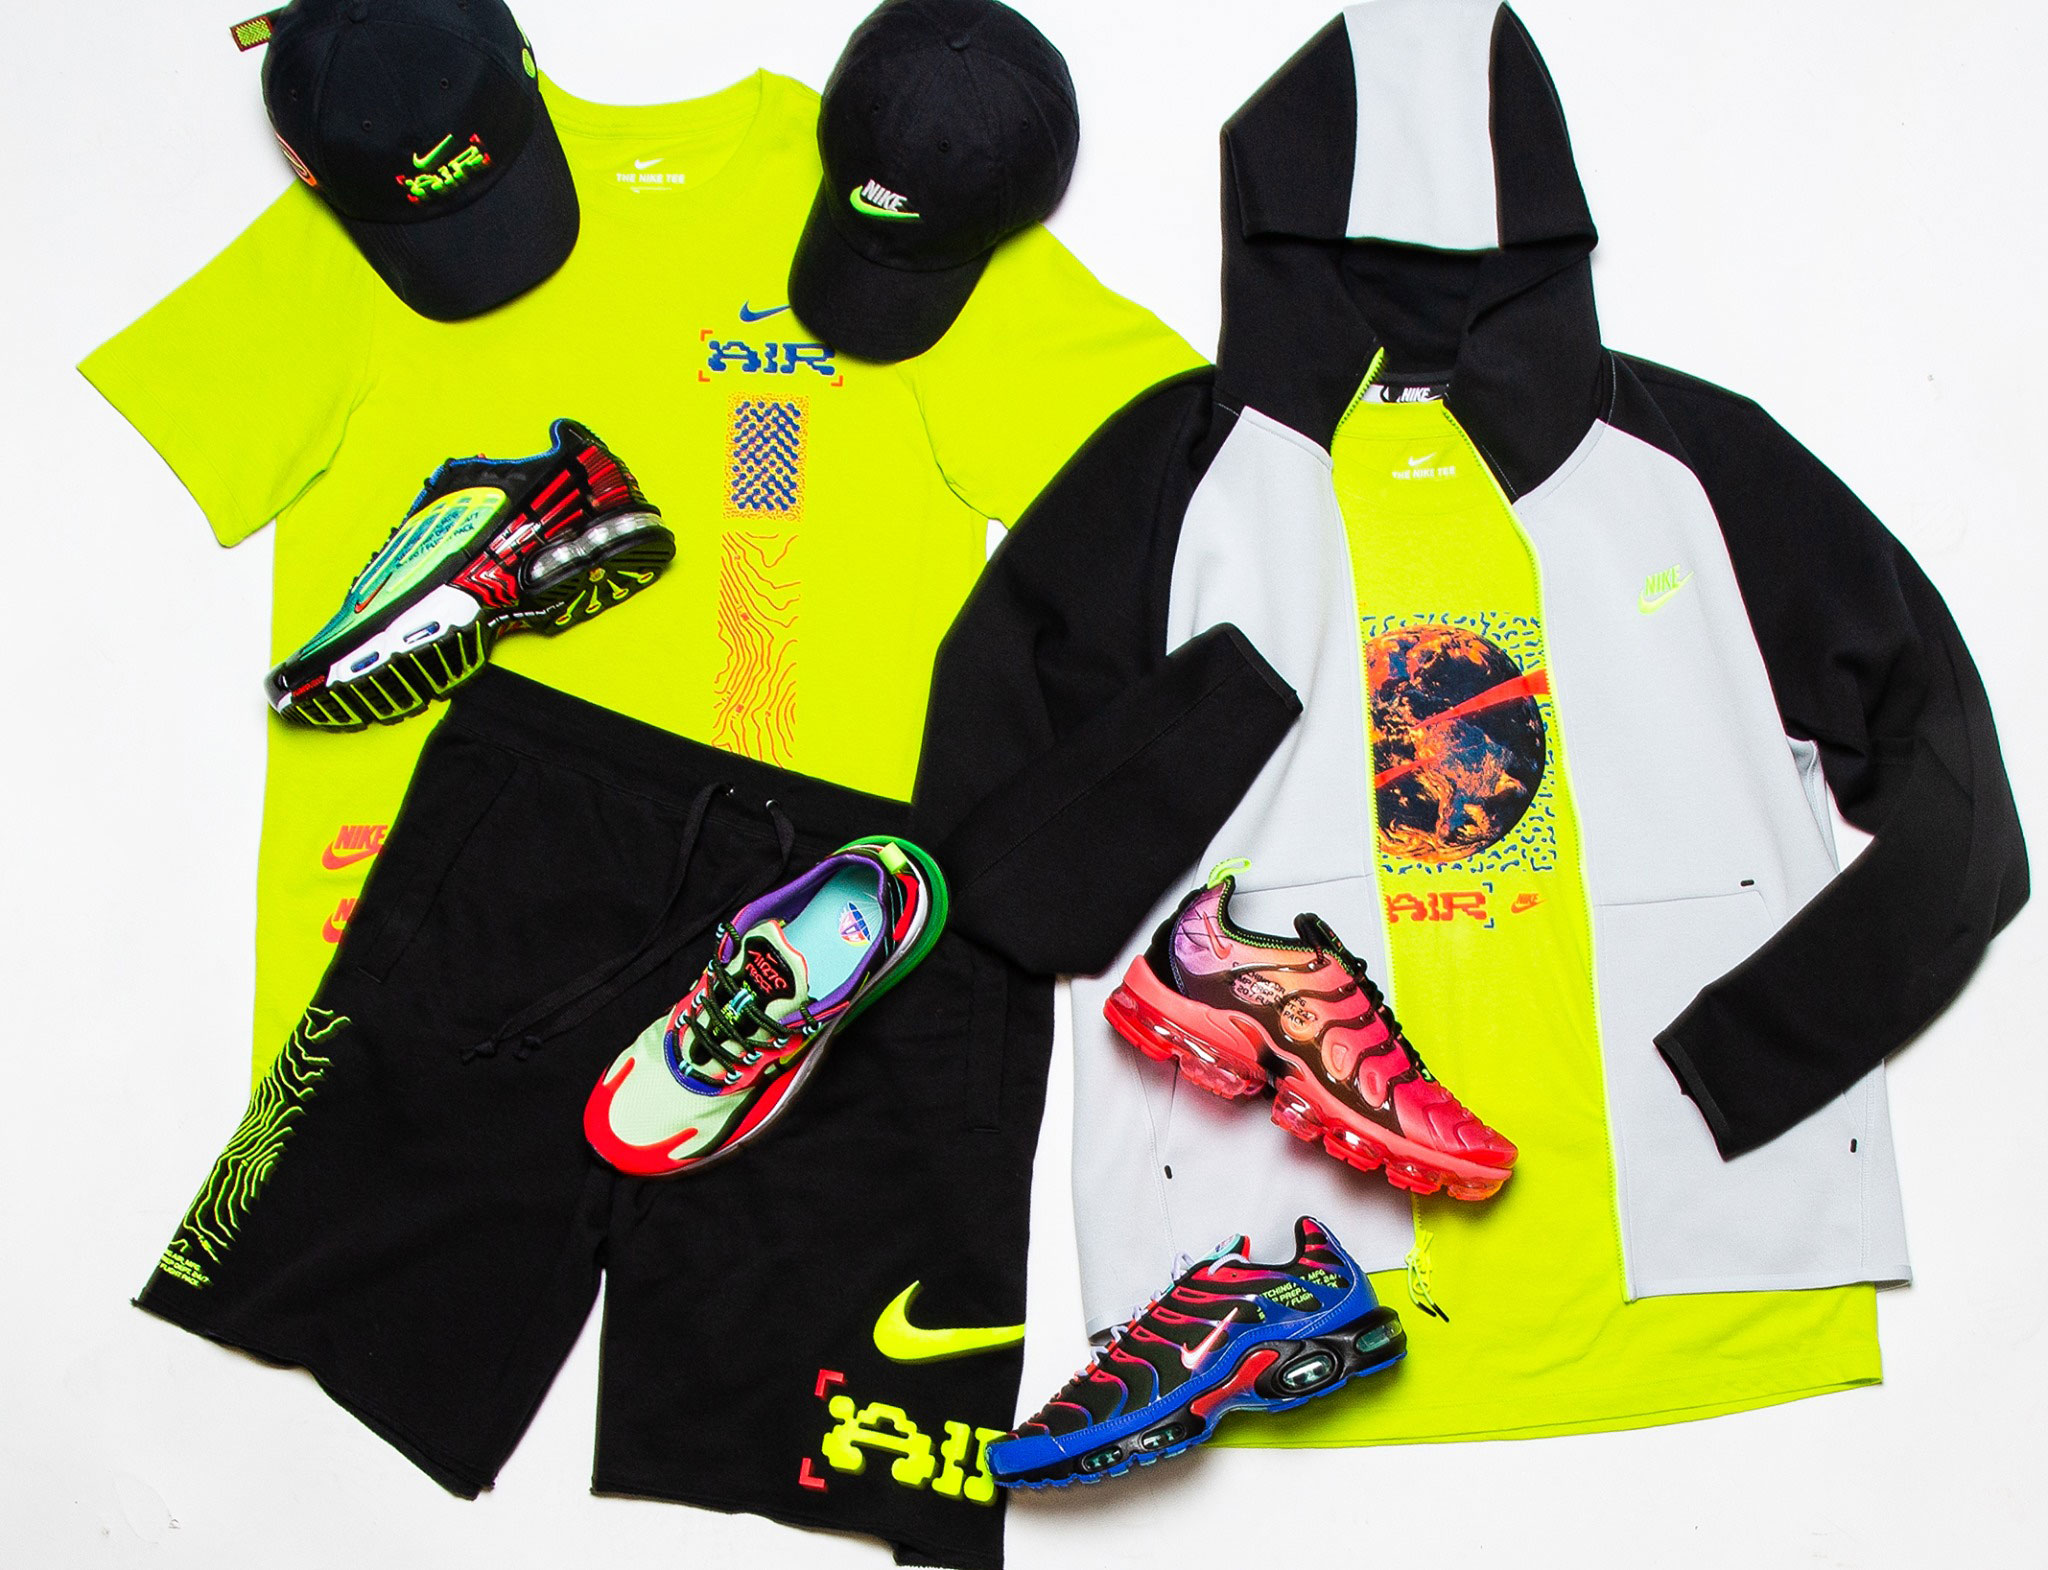 Nike Air Max Day 2020 Clothing and 